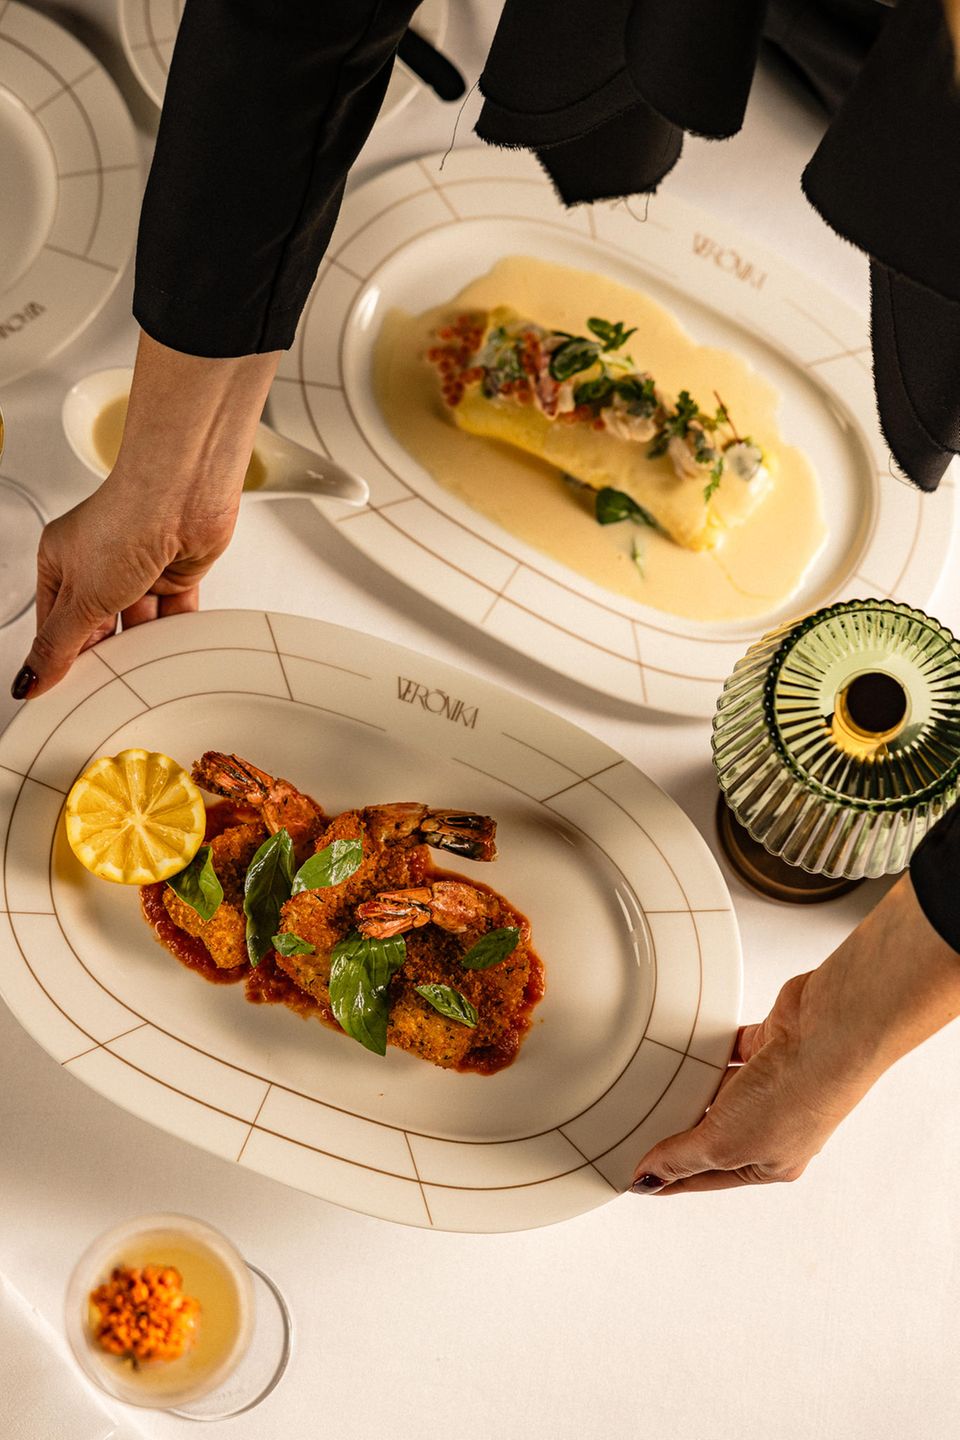 Two dishes, big recommendation: The signature dish "Lobster omelet" (above) and the shrimp Milanese